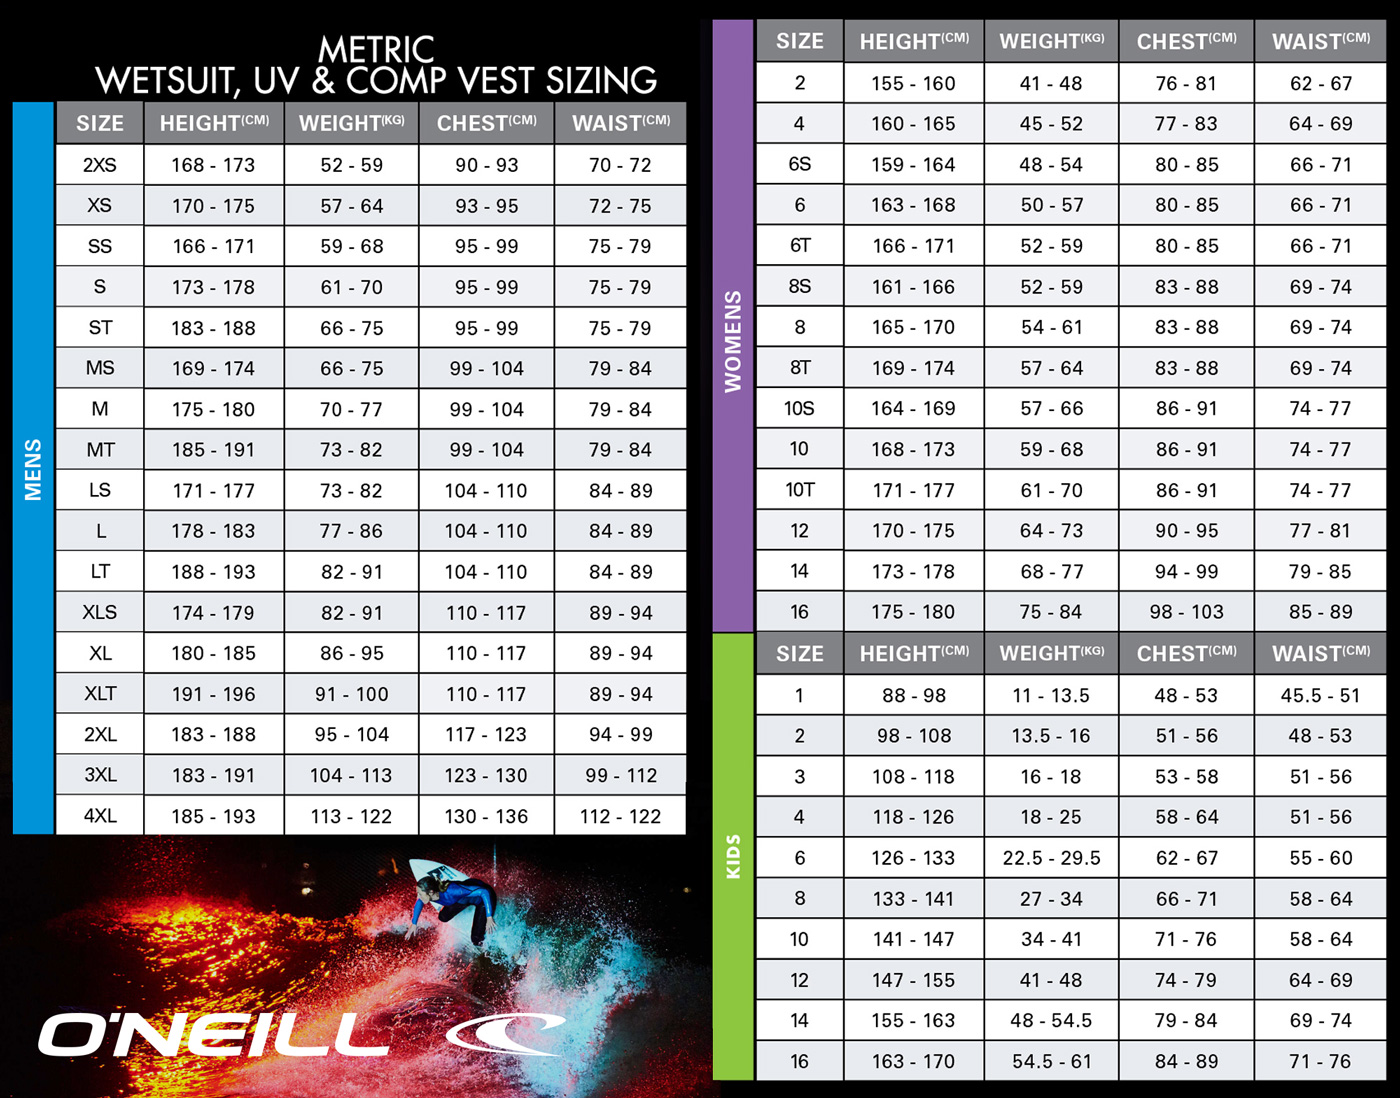 O'Neill Wetsuit and Comp Vest Size Guide for Men, Women and Youth